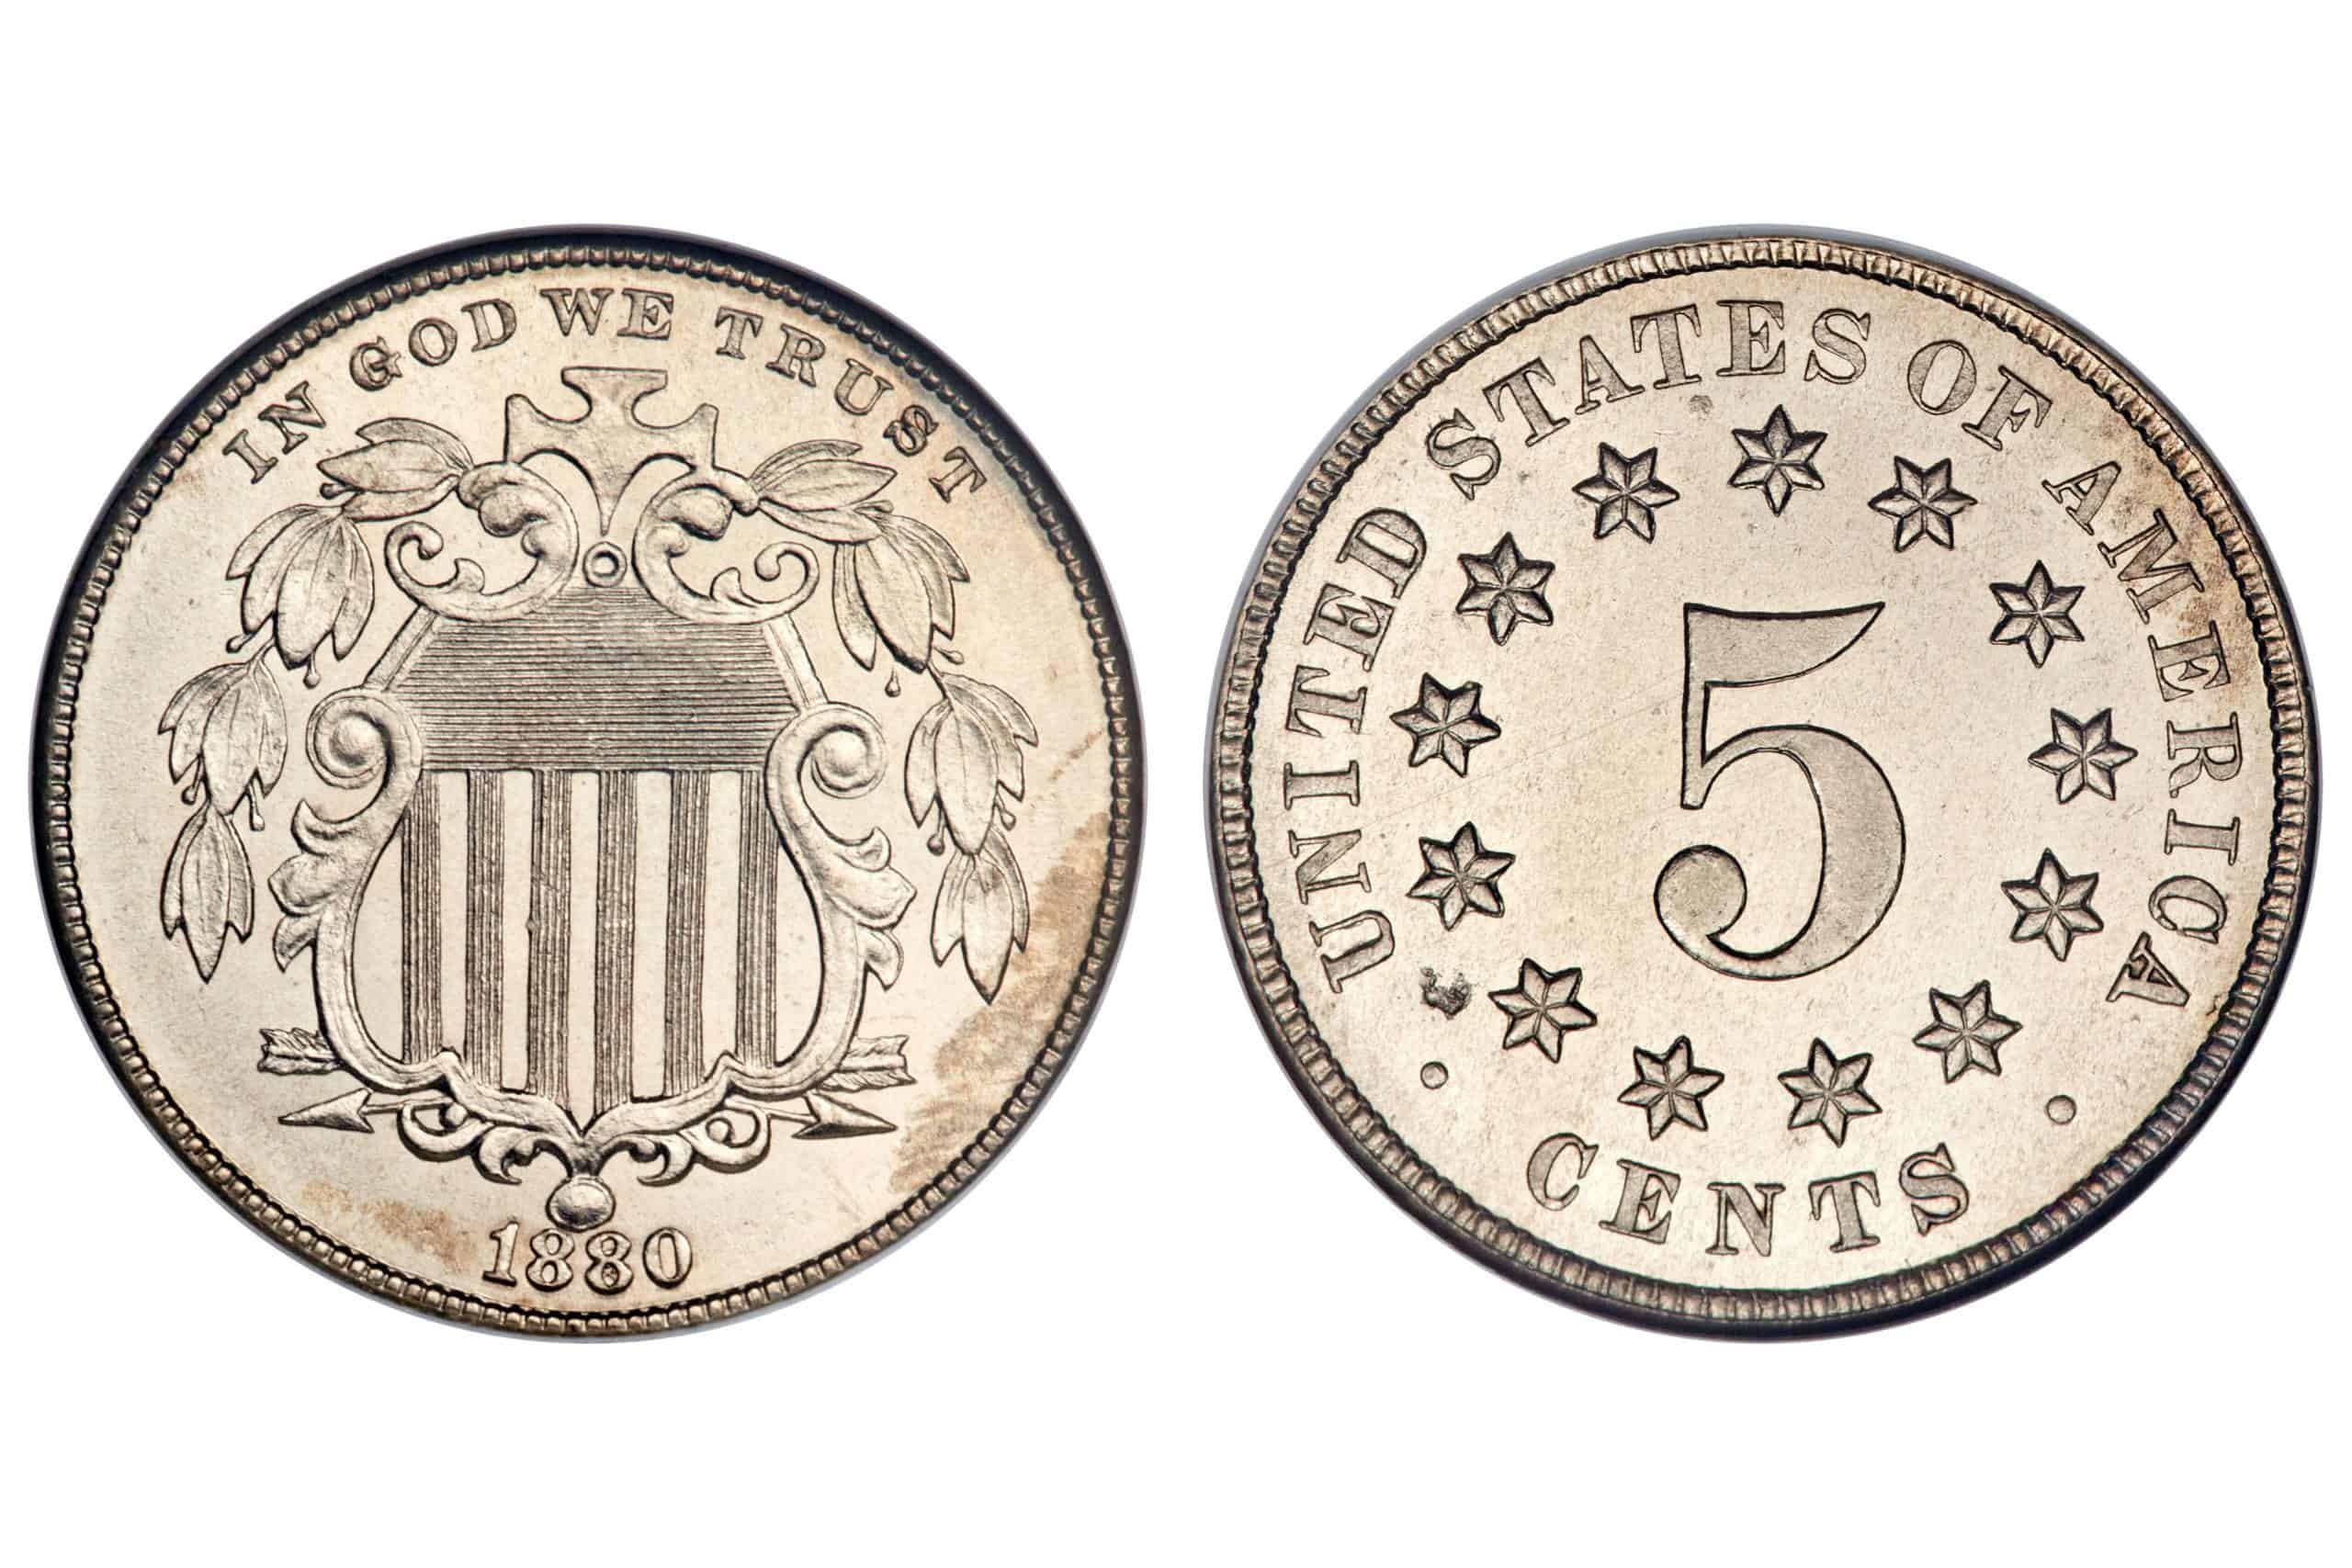 Shield nickels (1866 to 1883)